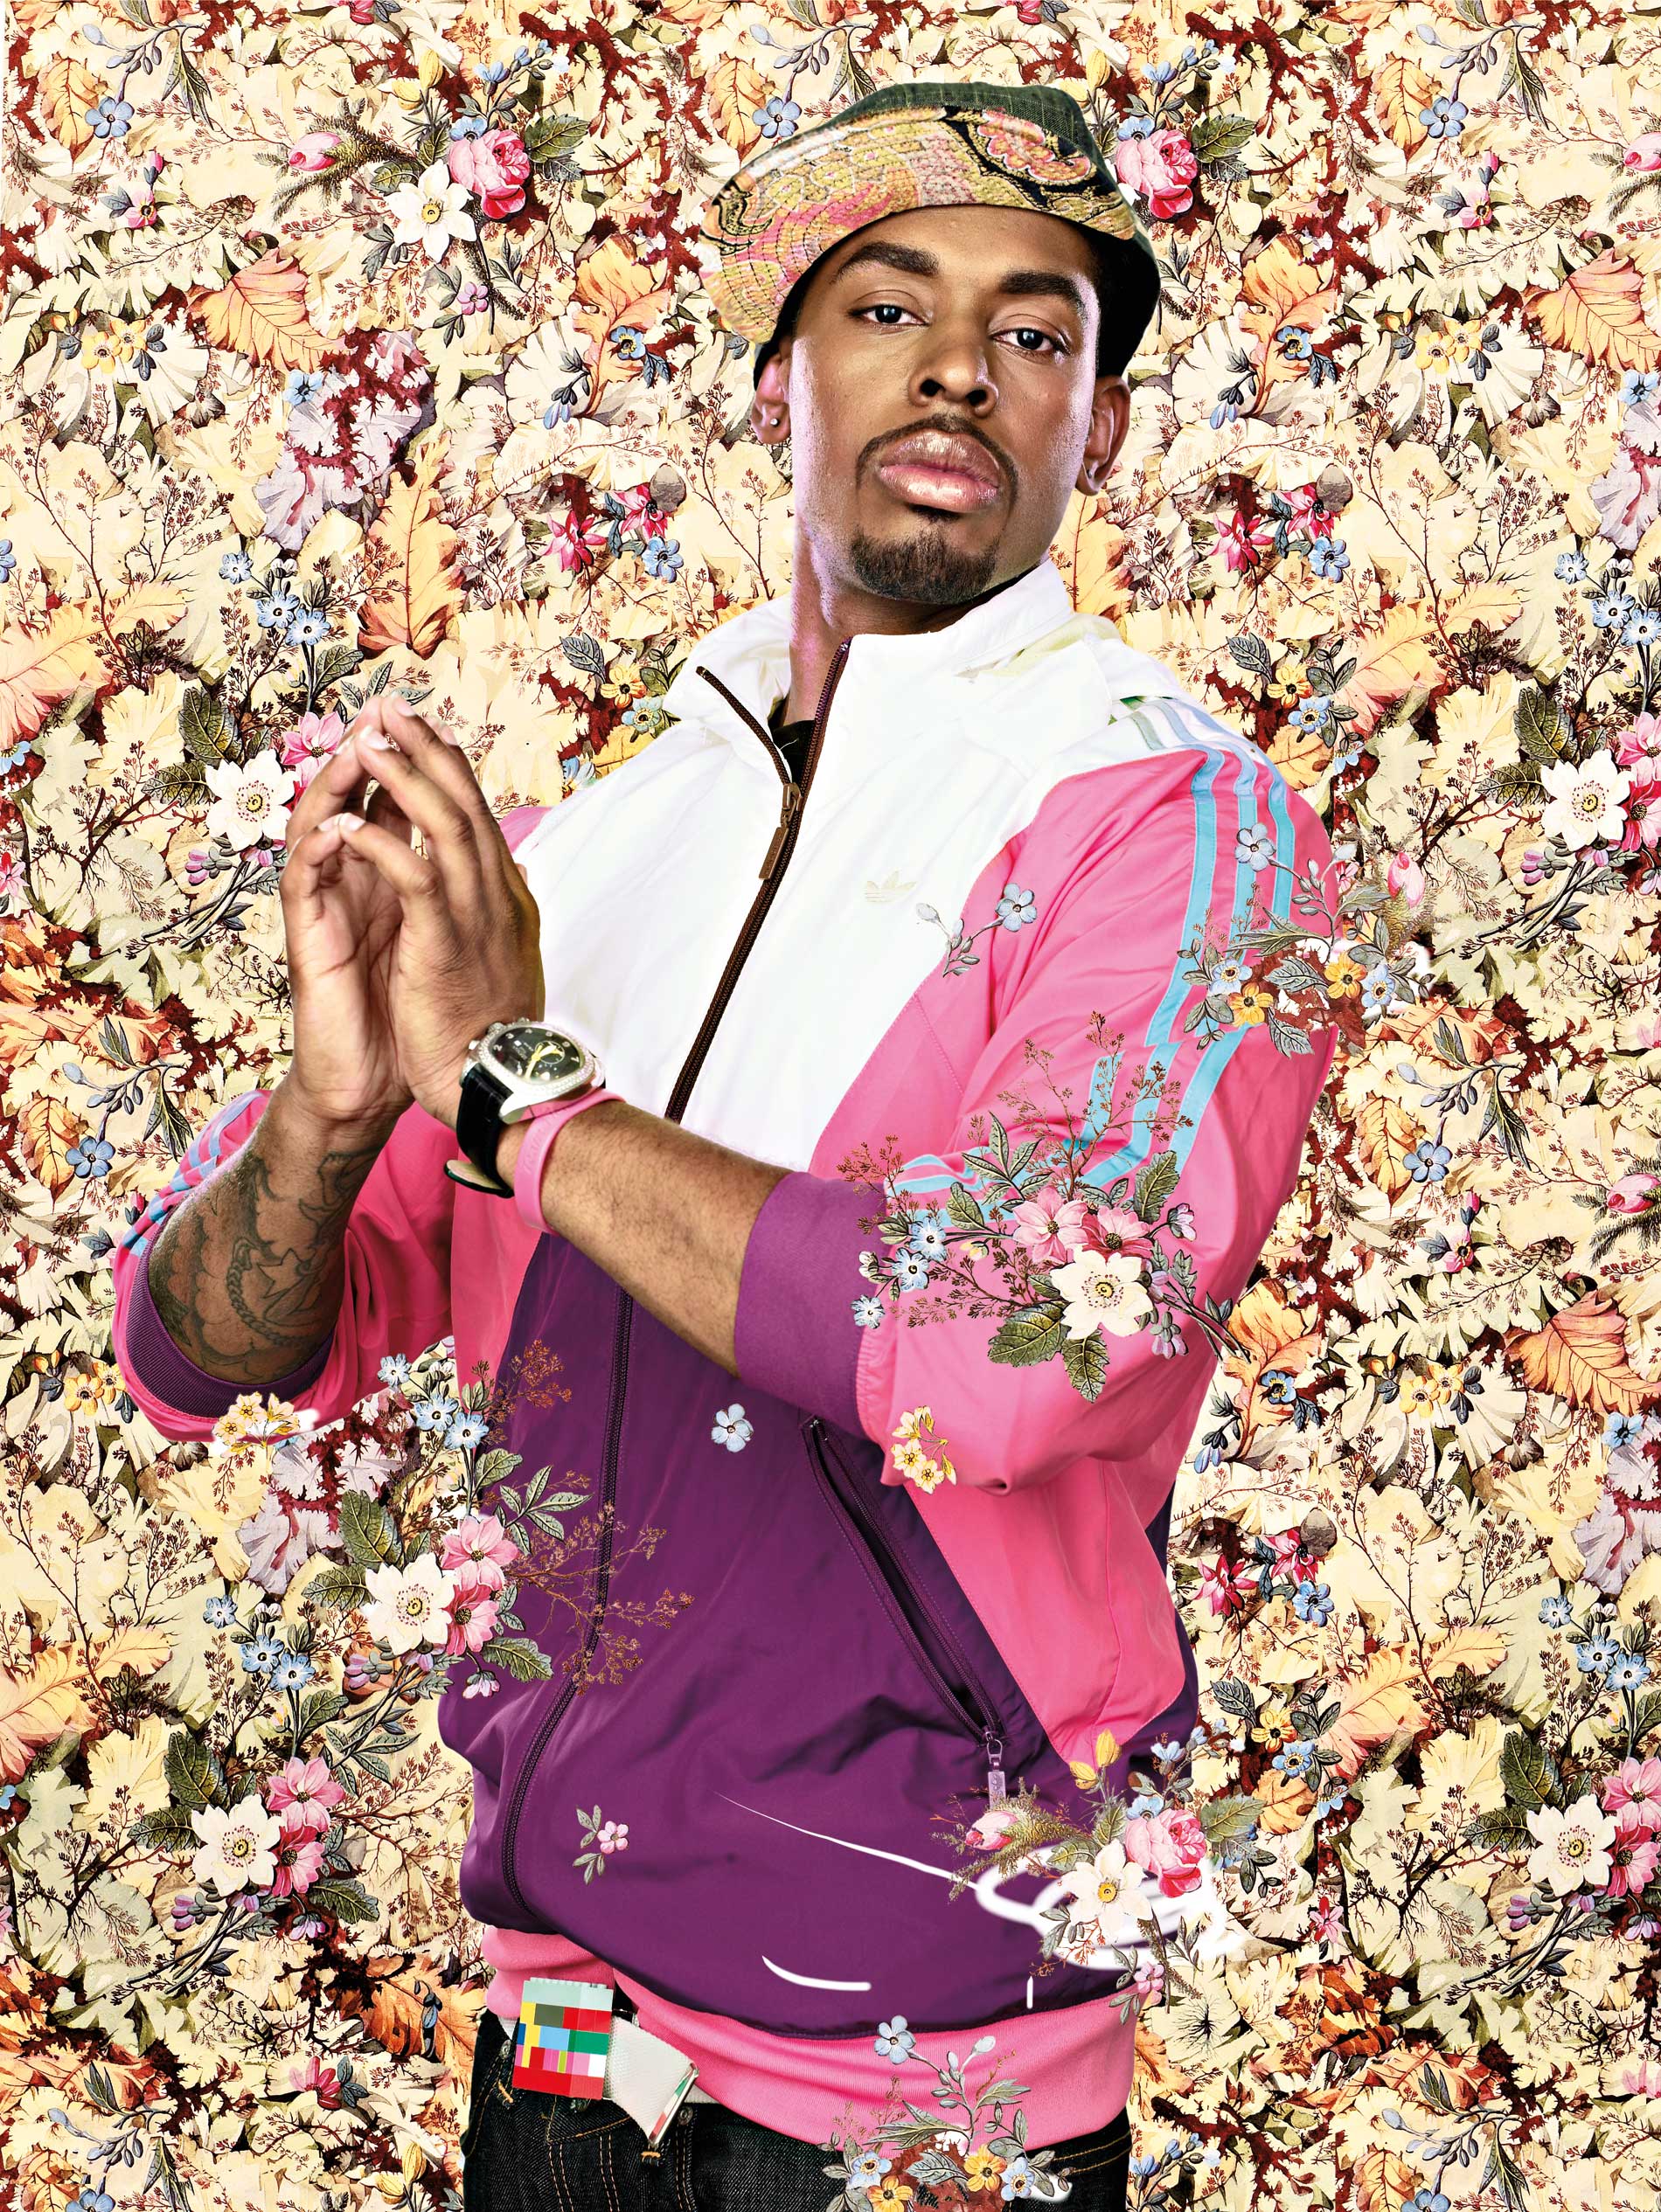 Kehinde Wiley | Black Light | After Jean-Auguste Dominique Ingres' 